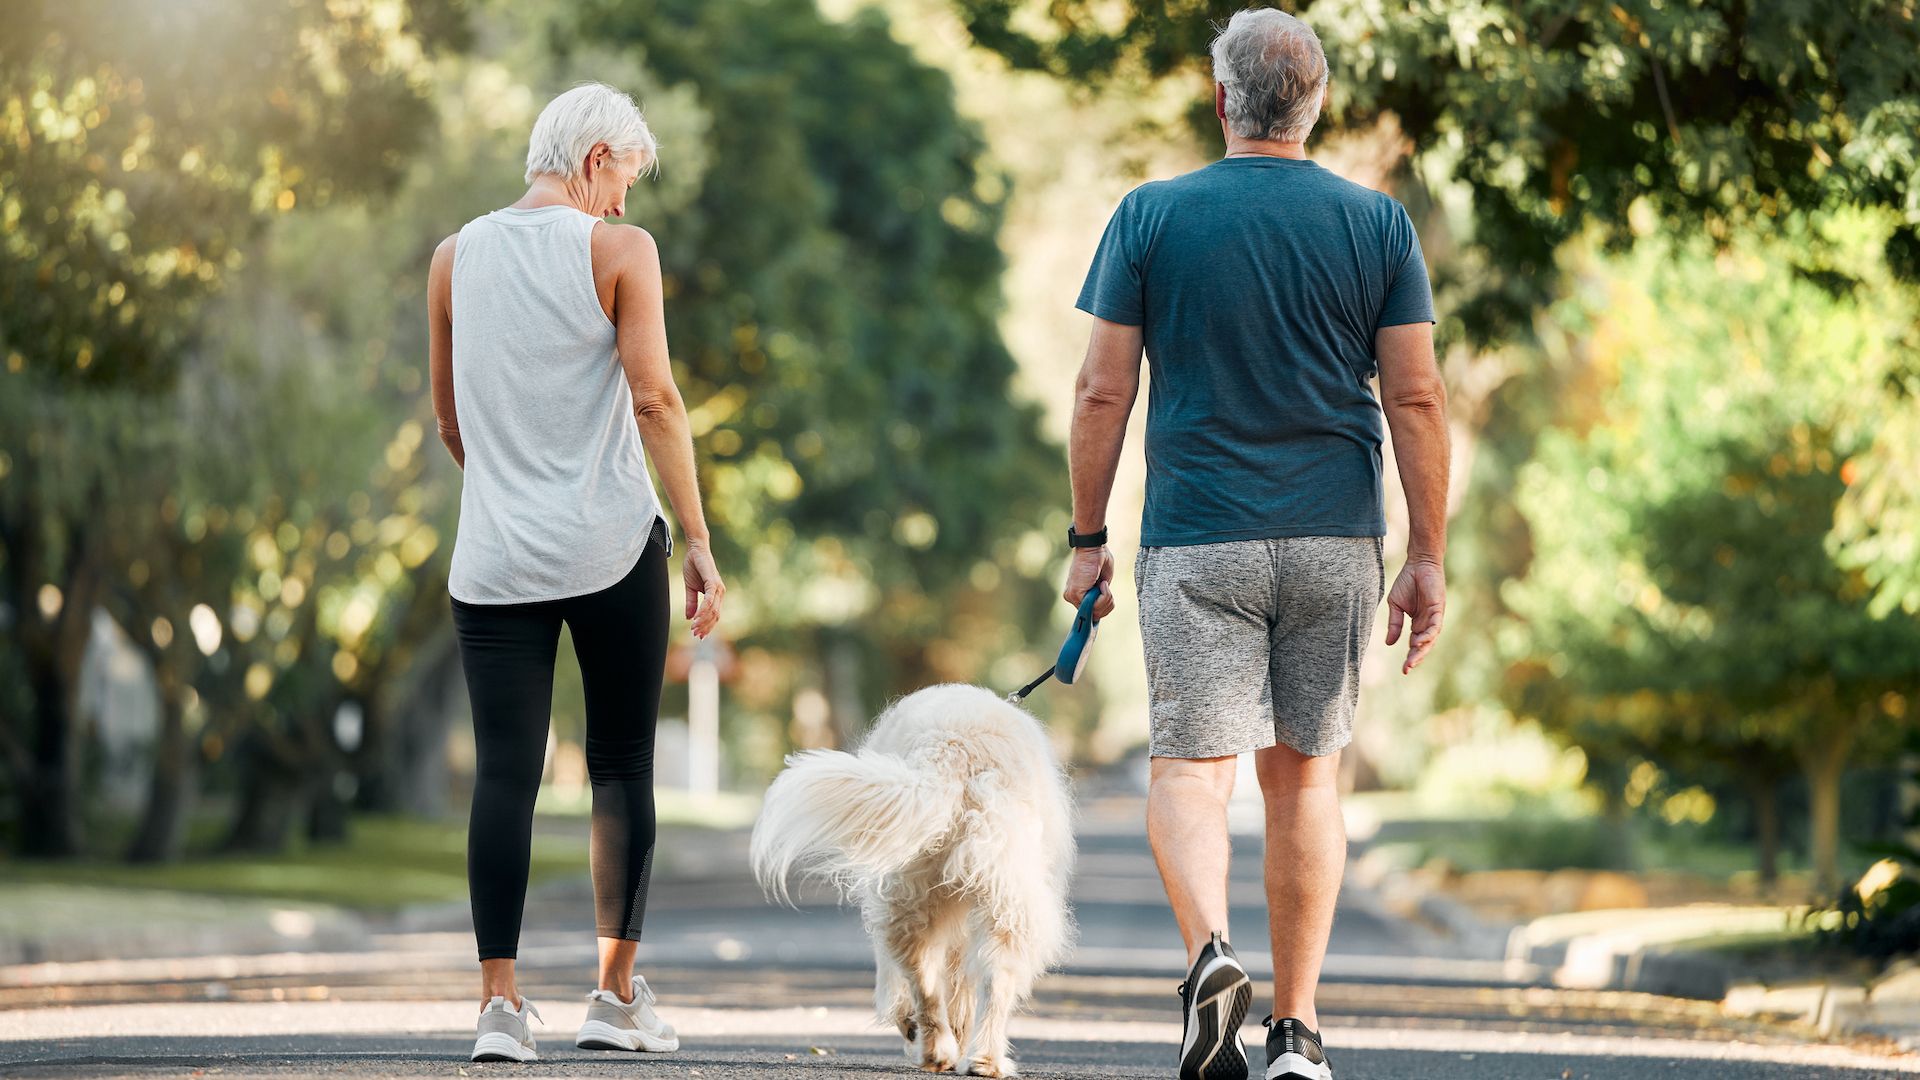 <p>                     Owning a dog can not only reduce your risk of dying young, but can also make senior people seem 10 years younger, according to a <a href="https://news.st-andrews.ac.uk/archive/ten-years-younger/#:~:text=Owning%20a%20dog%20makes%20older,younger%20than%20their%20biological%20age." rel="nofollow">study at Scottish University St Andrews</a>. This is largely due to the increased exercise levels (regardless of the distance covered) compared to your peers, and the fact that a dog ensures you get out and about in the fresh air, and staying mobile.                   </p>